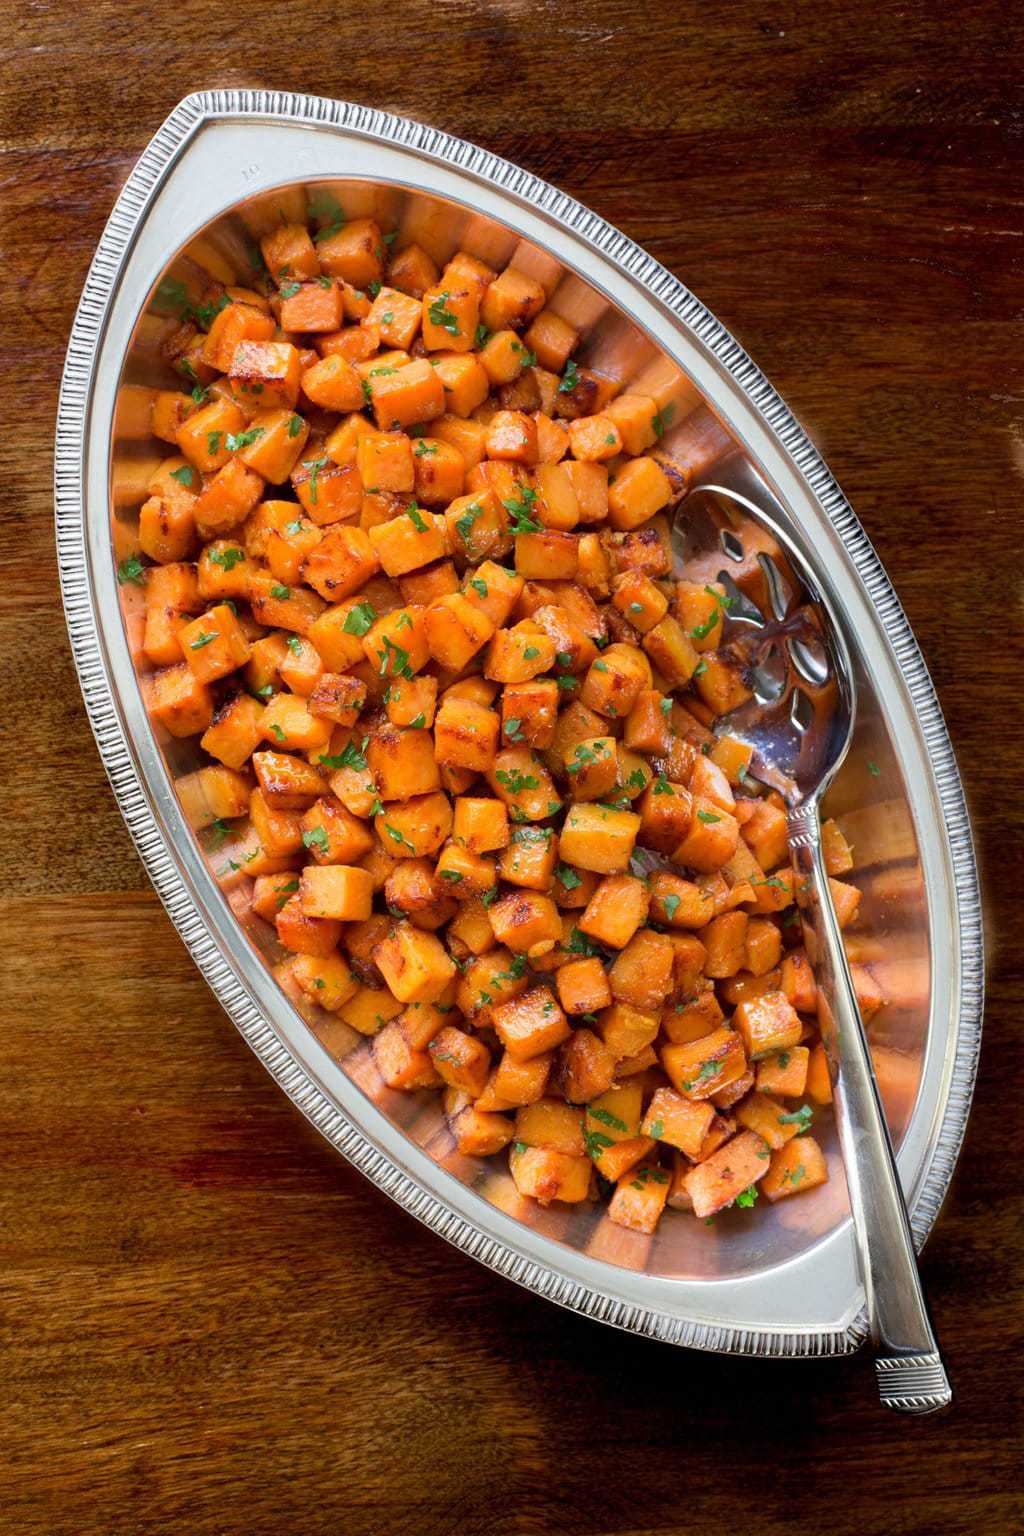 Super quick and easy, these Caramelized Sweet Potatoes are a healthy alternative to traditional, sticky, marshmallow recipes. And they taste like candy! https://thecafesucrefarine.com